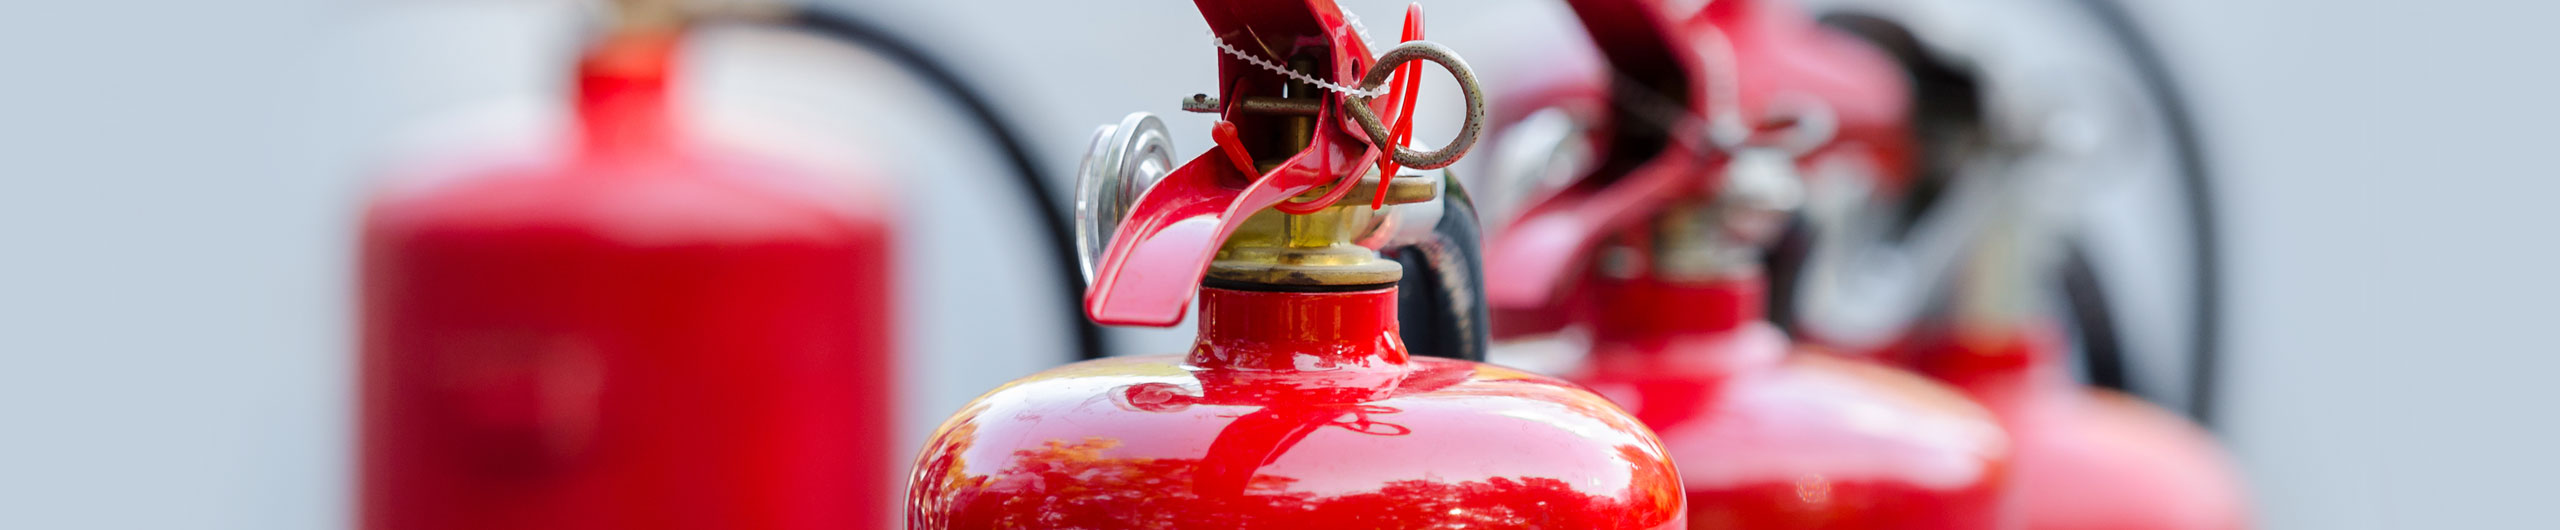 Fire extinguisher installation and maintenance